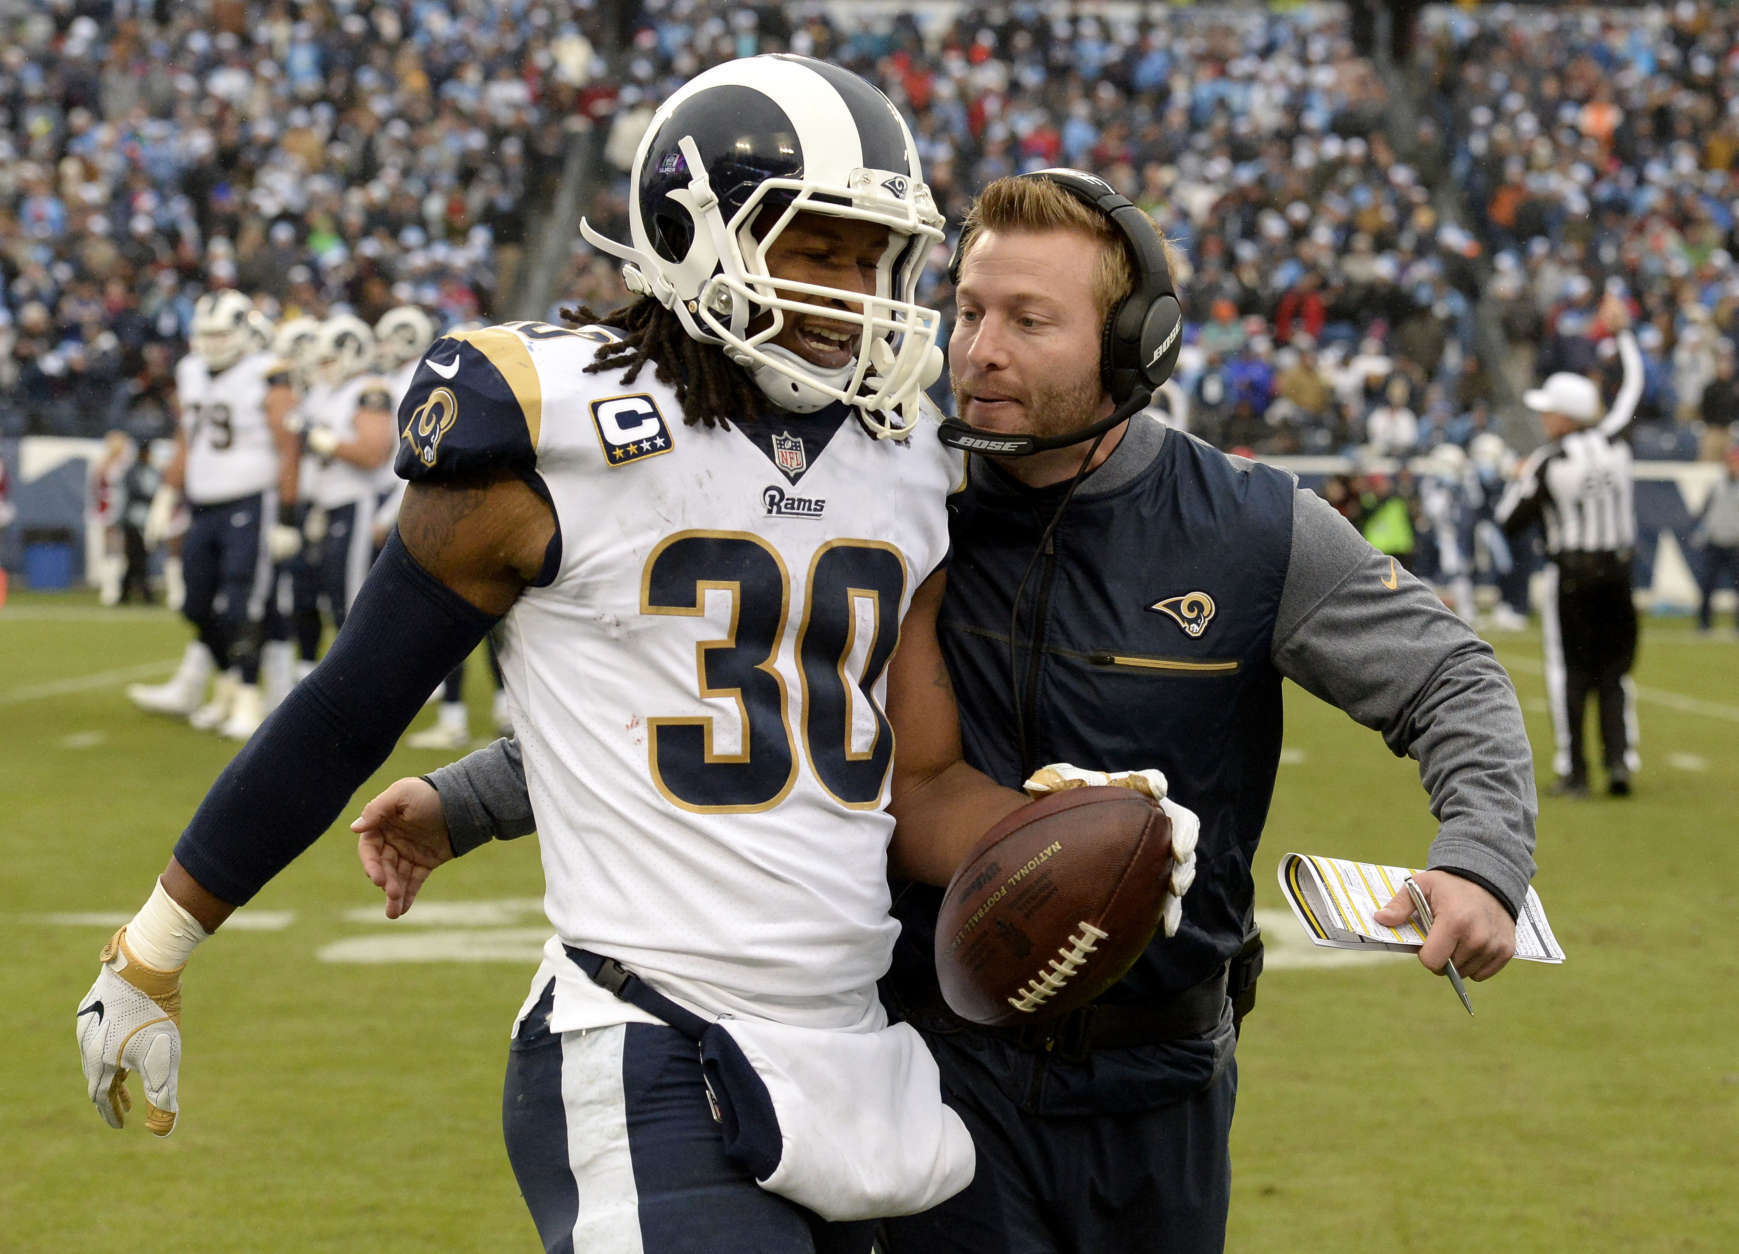 Los Angeles Rams running back Todd Gurley (30) is congratulated by head coach Sean McVay after Gurley scored a touchdown against the Tennessee Titans on an 80-yard pass reception in the first half of an NFL football game Sunday, Dec. 24, 2017, in Nashville, Tenn. (AP Photo/Mark Zaleski)